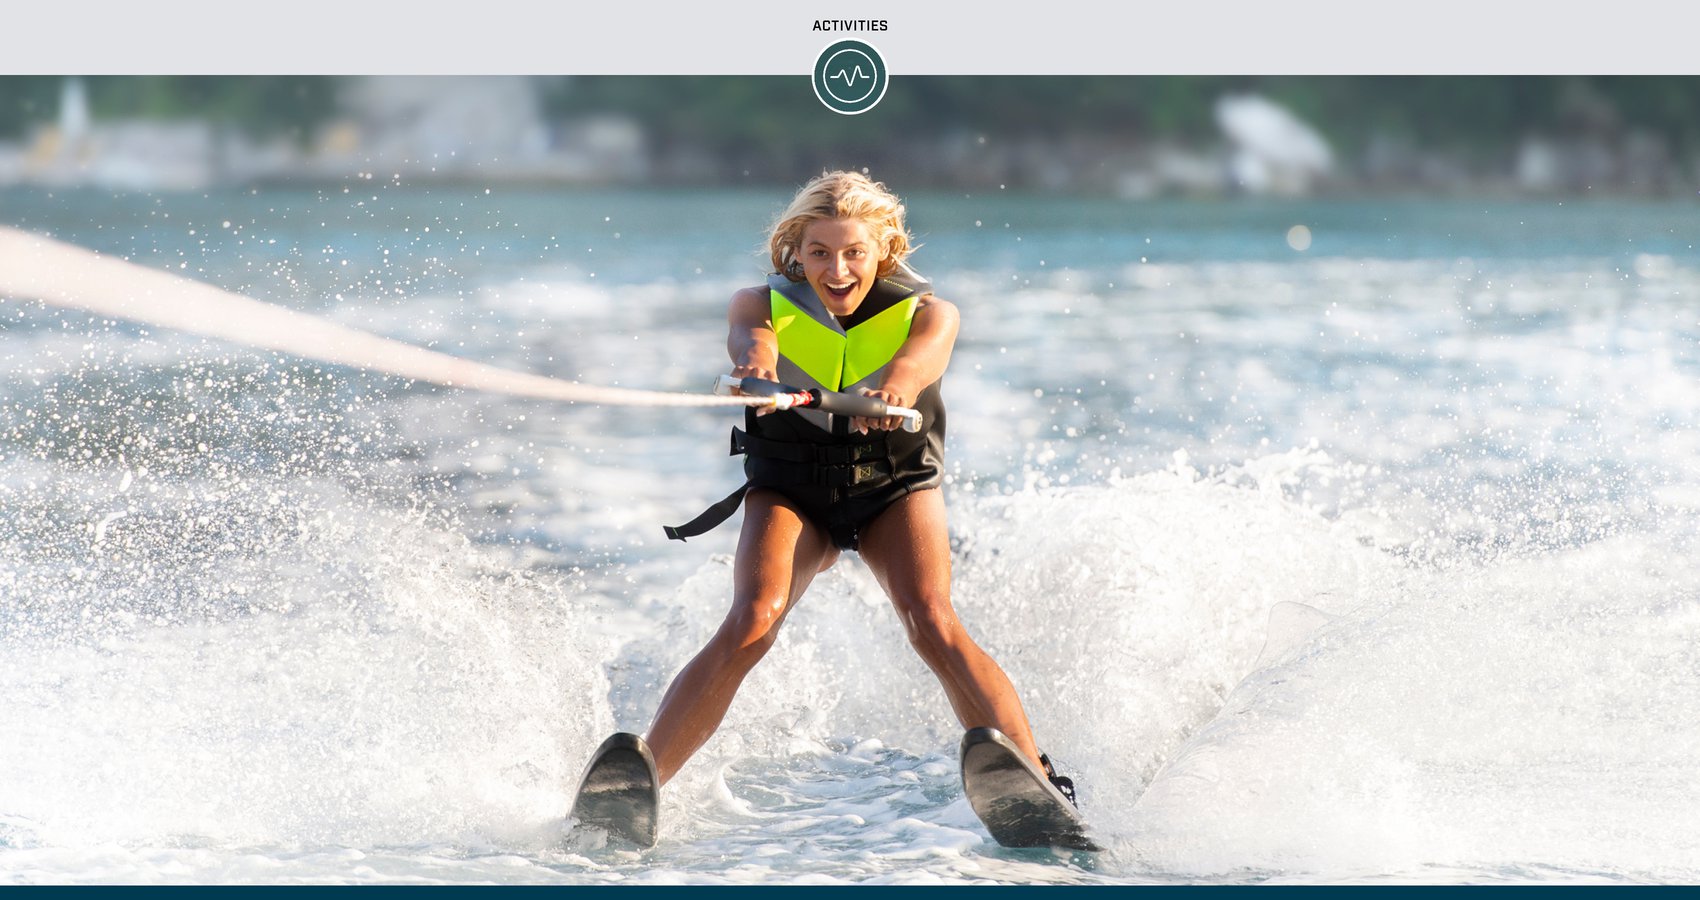 Glide With Confidence: Top Picks for Water Skis for Starters